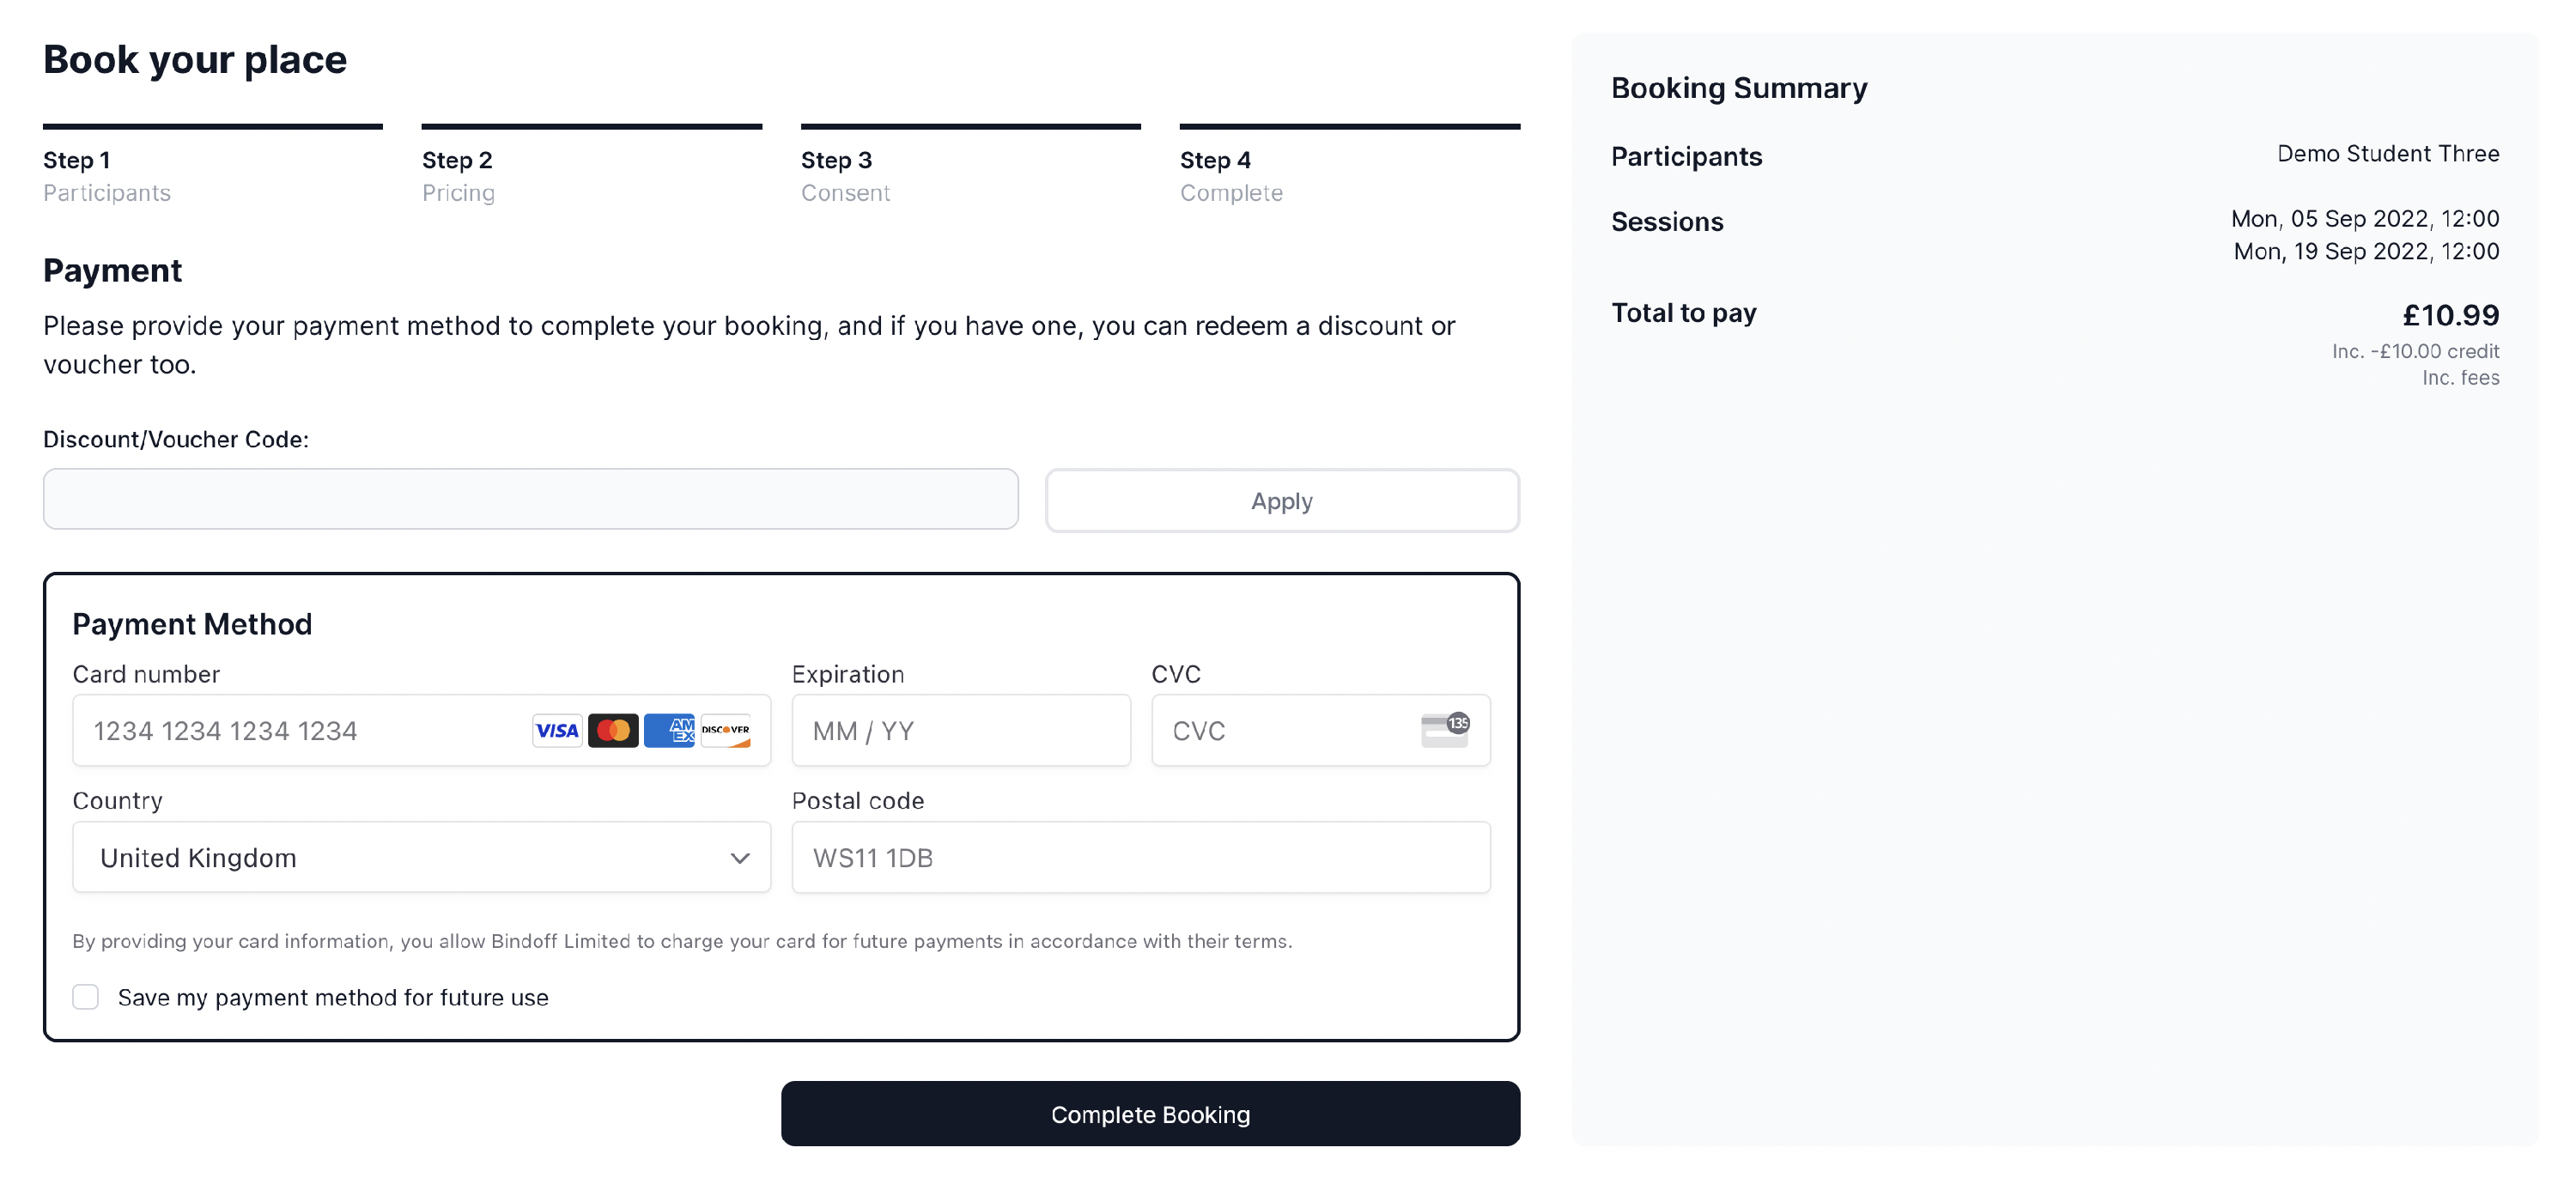 Self-booking payment